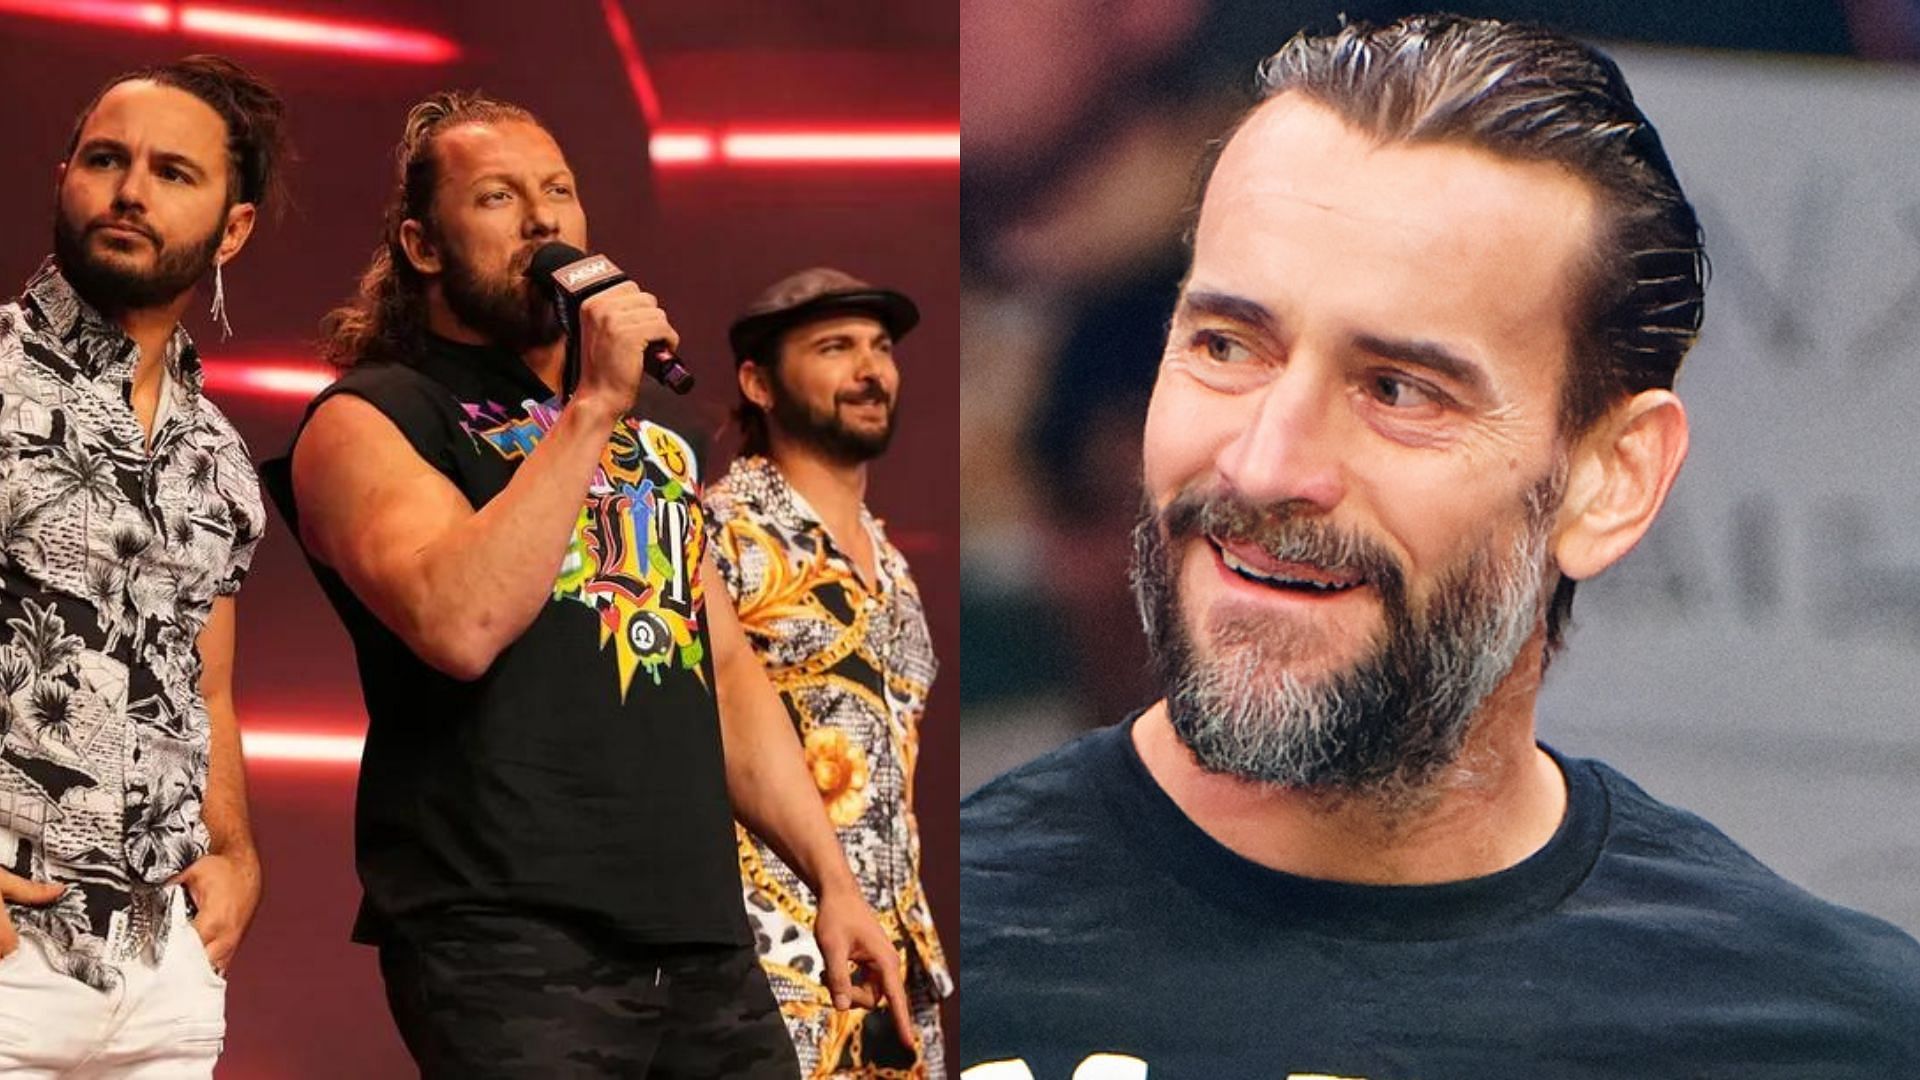 A former WWE writer has called CM Punk and The Elite wasteful